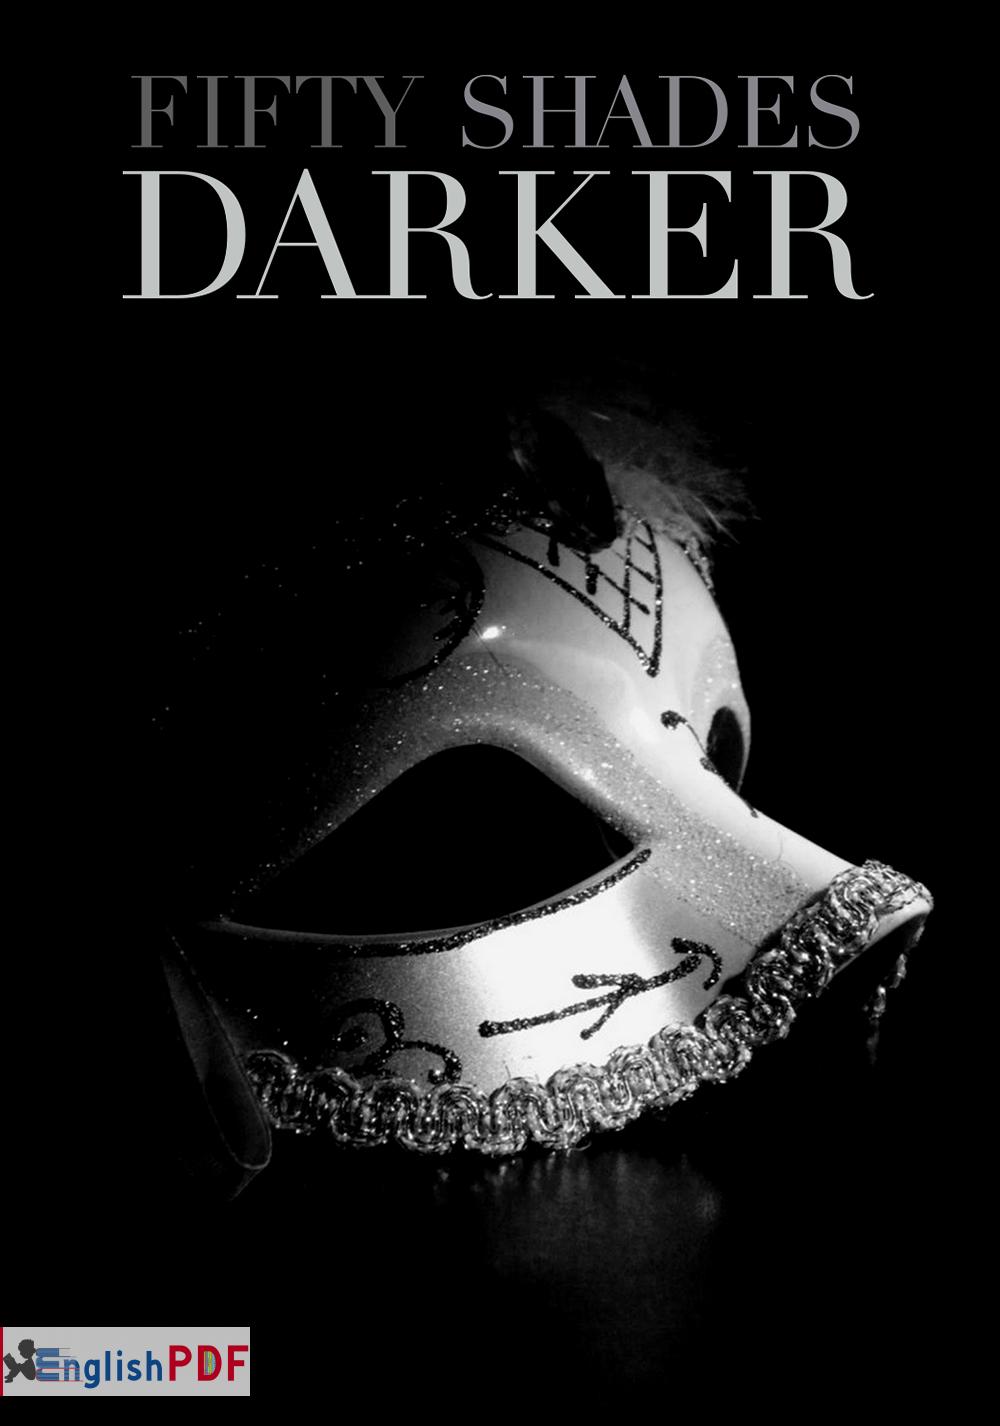 50 shades darker free pdf download for android